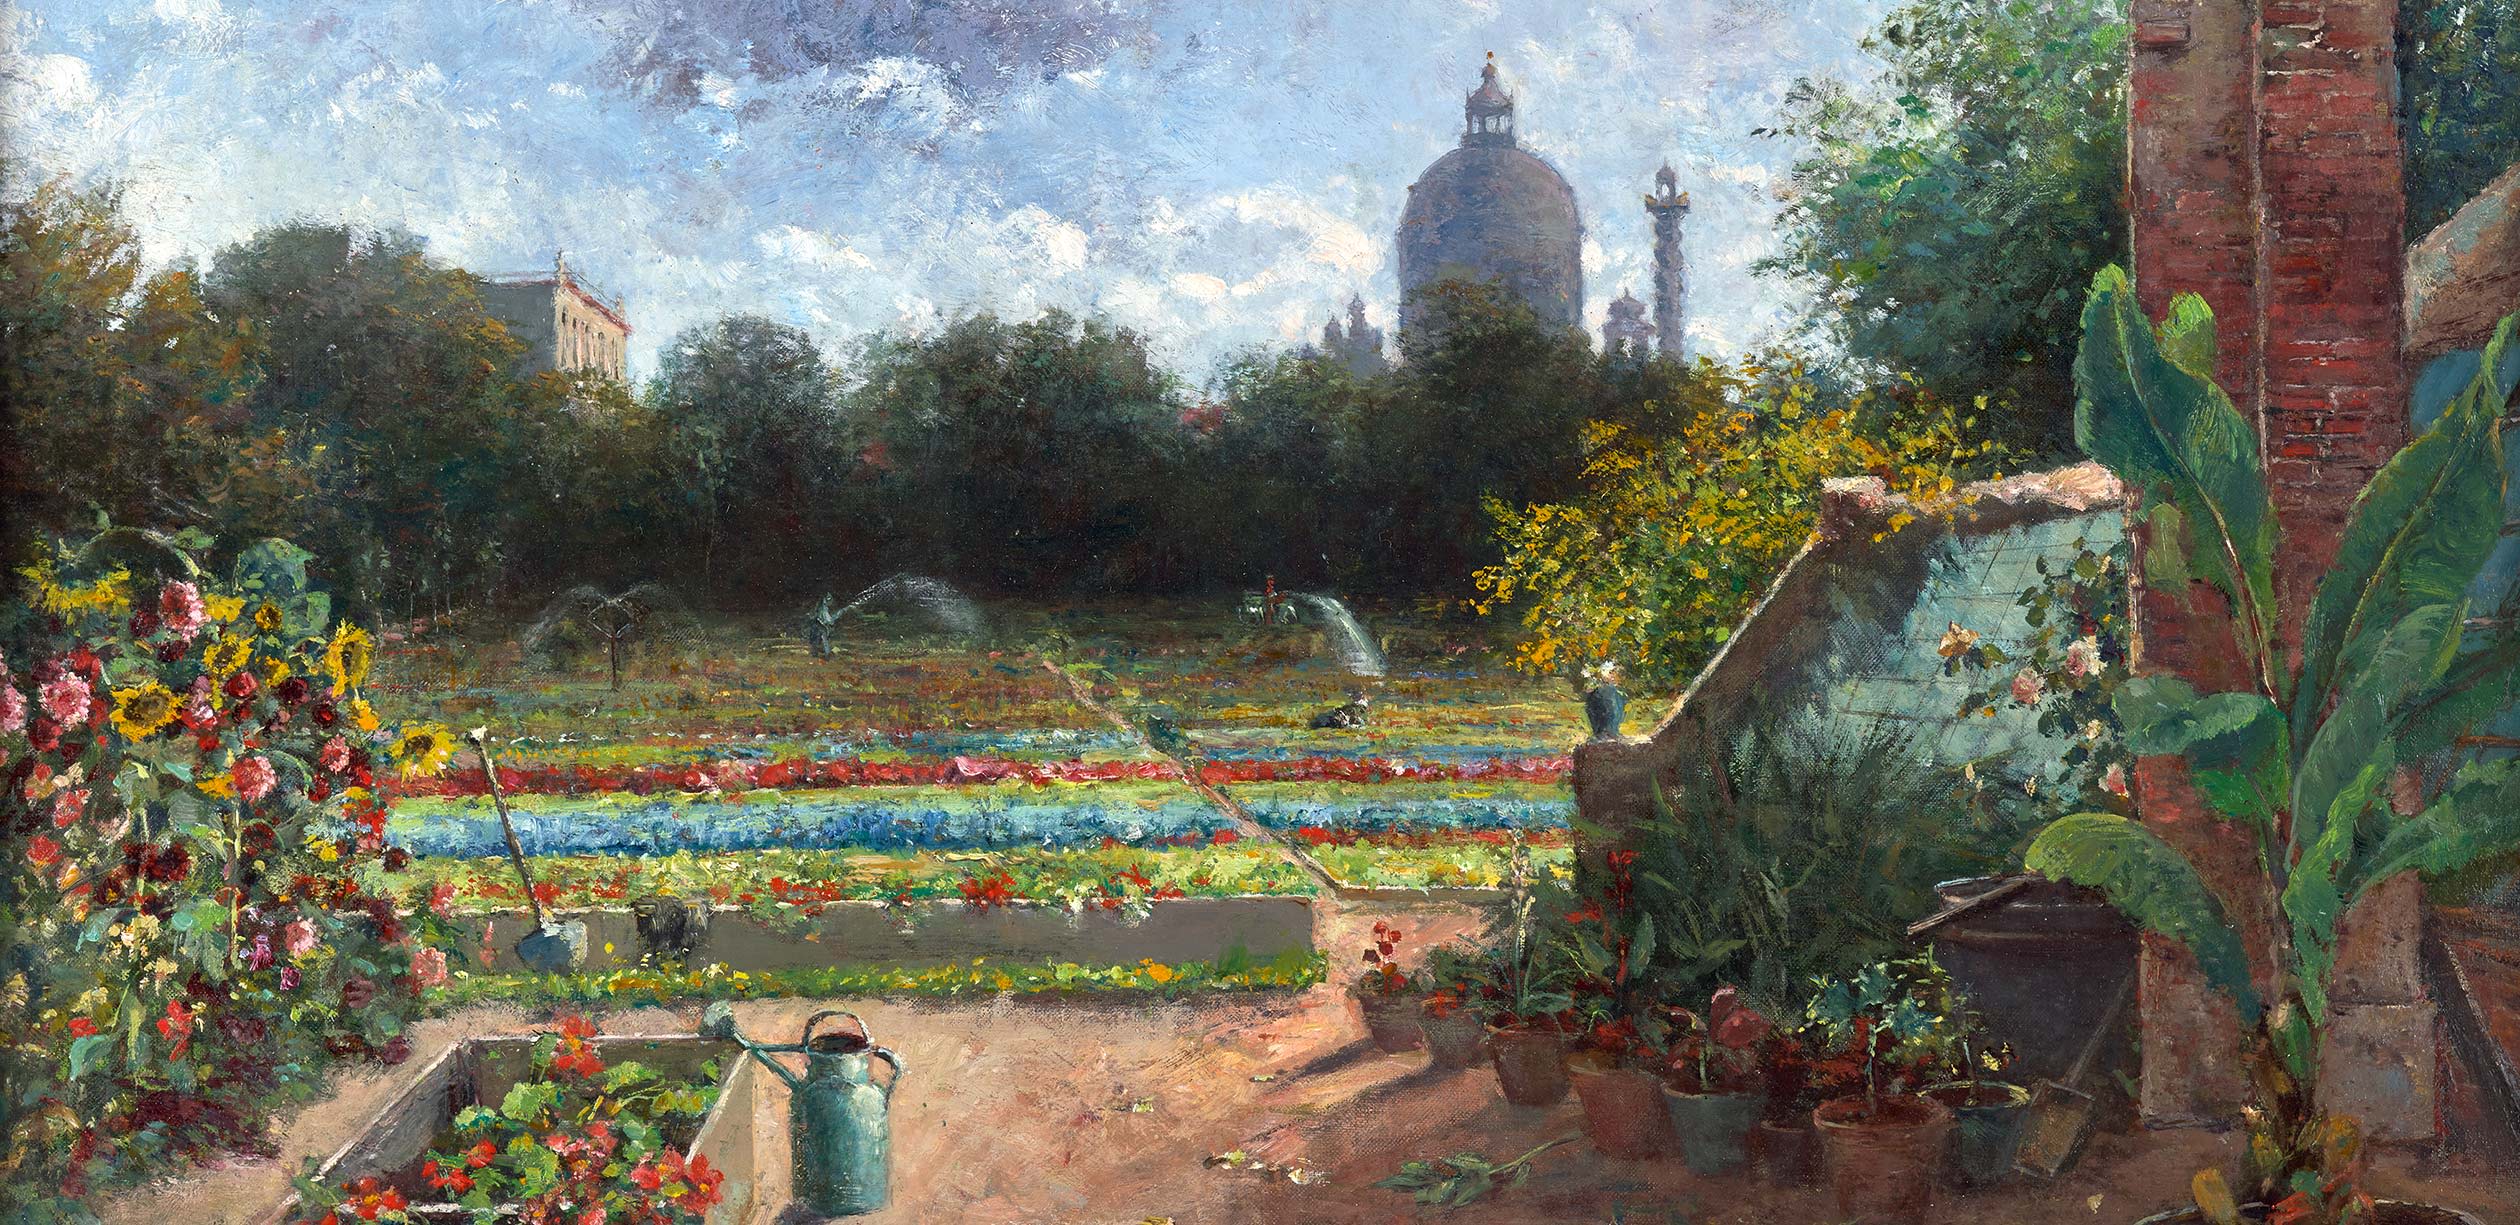 colour painting of a garden with blooming flowers and plants and city buildings in the background.